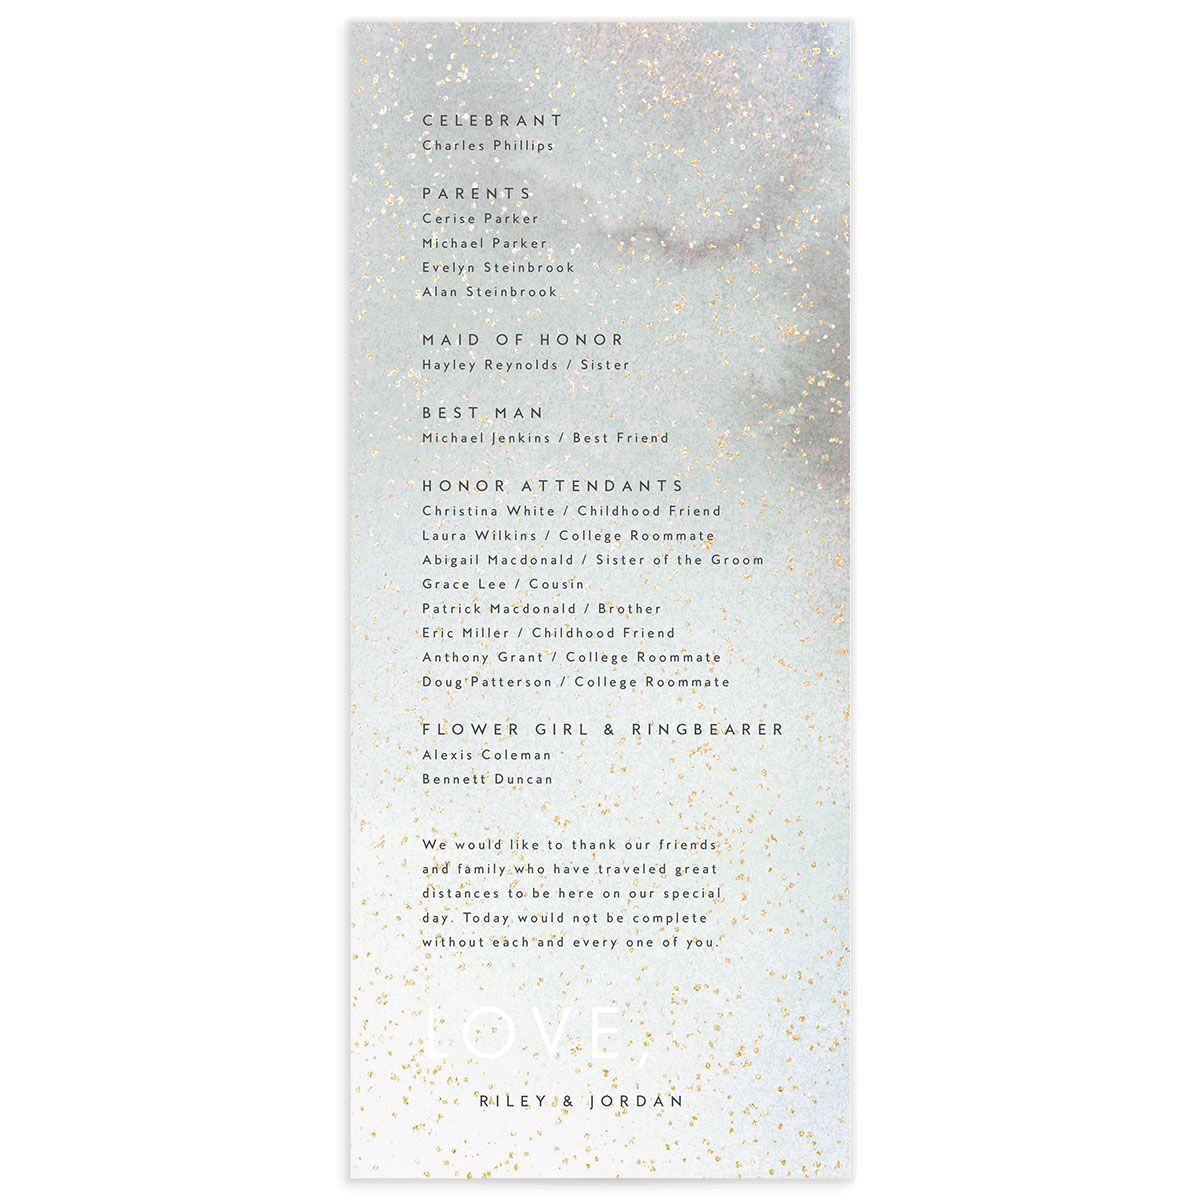 Pearlescent Finish Wedding Programs back in Champagne